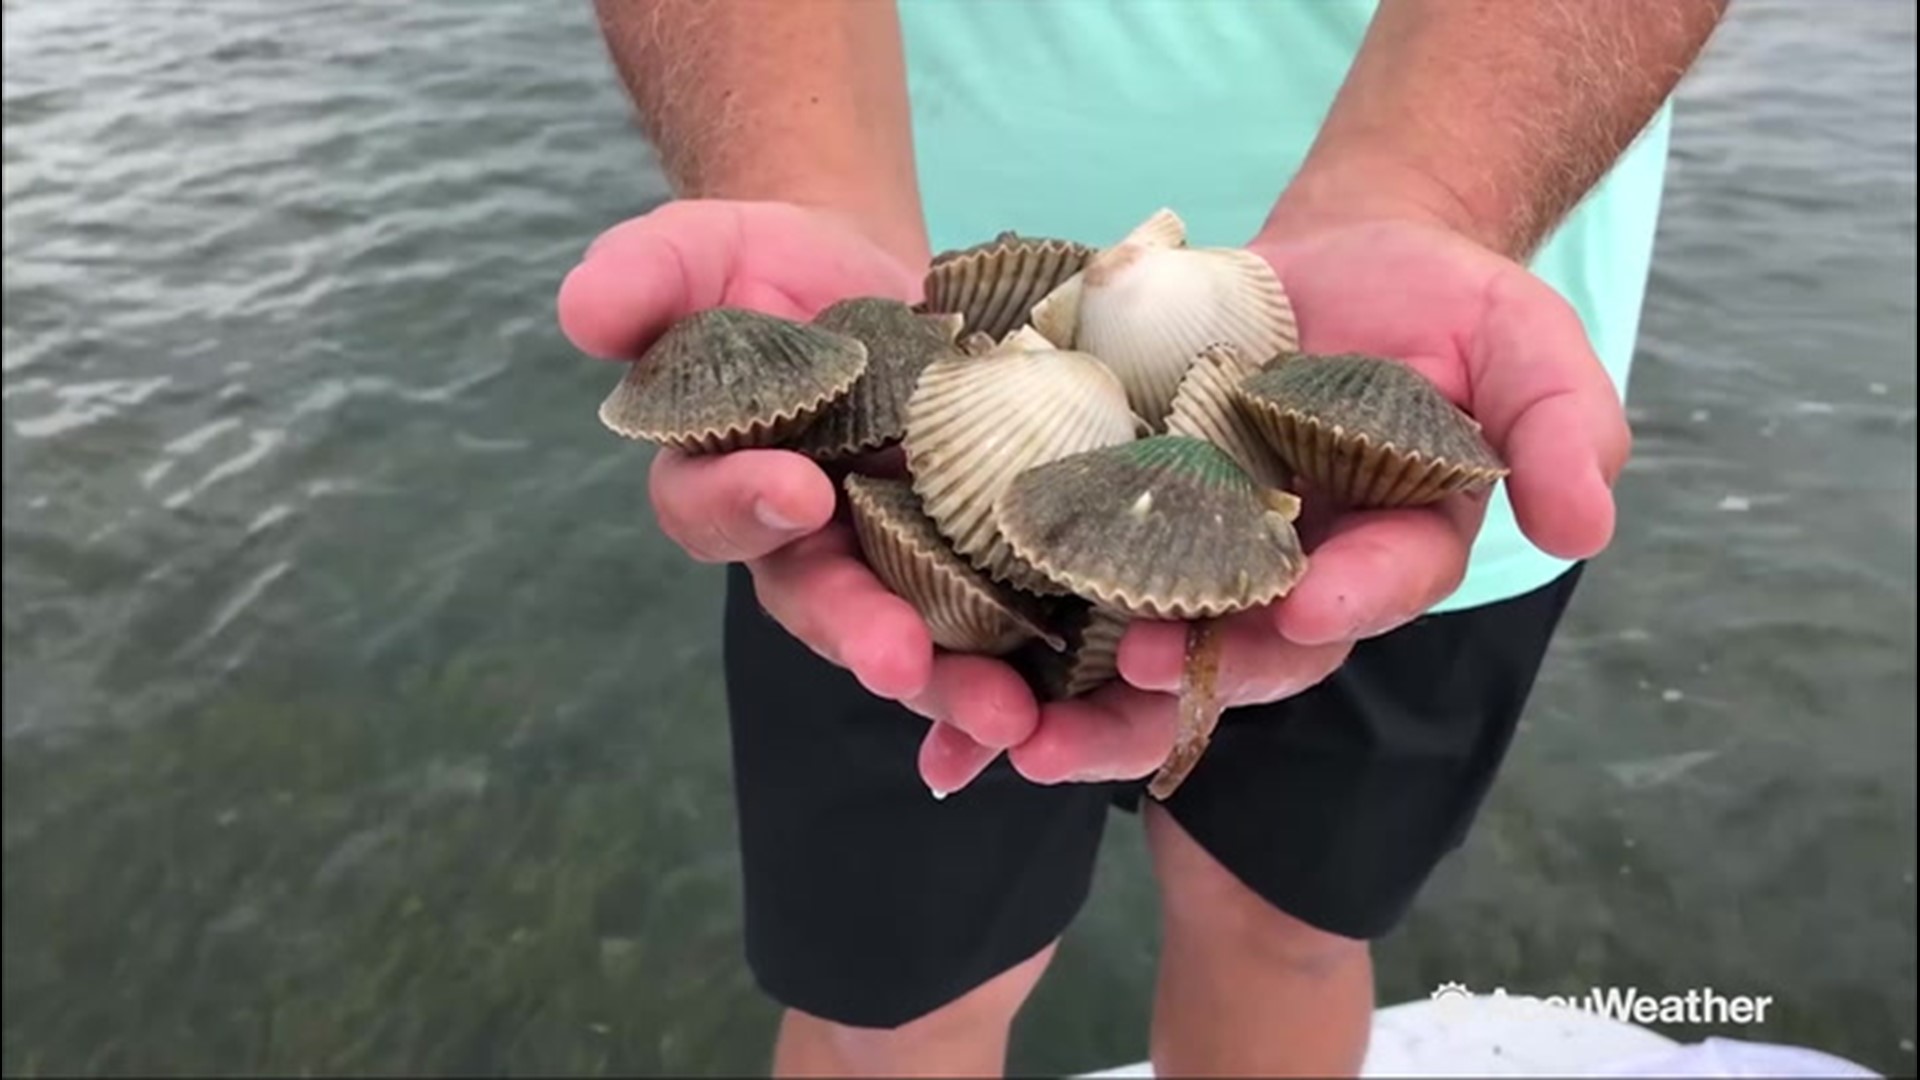 Bad Scallop Season | wwltv.com How To Tell If Scallops Are Bad